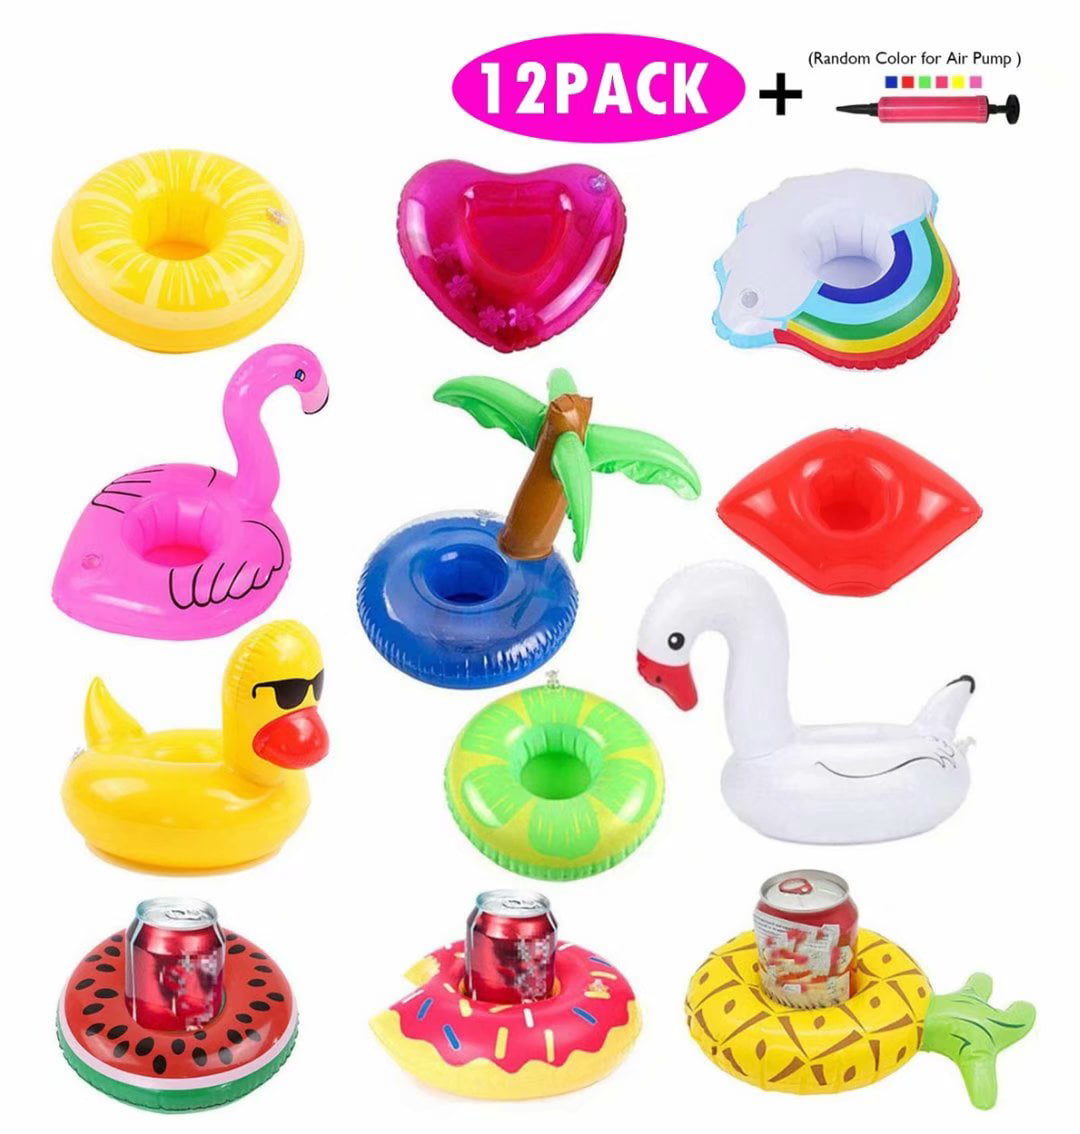 Flamingo Drink Holders,EFORCAR Pool Inflatable Drink Float Coasters,Children Bathtub Floating Toy Adult Summer Swimming Pool Party Wedding Home Decor Drink Cup Holder 